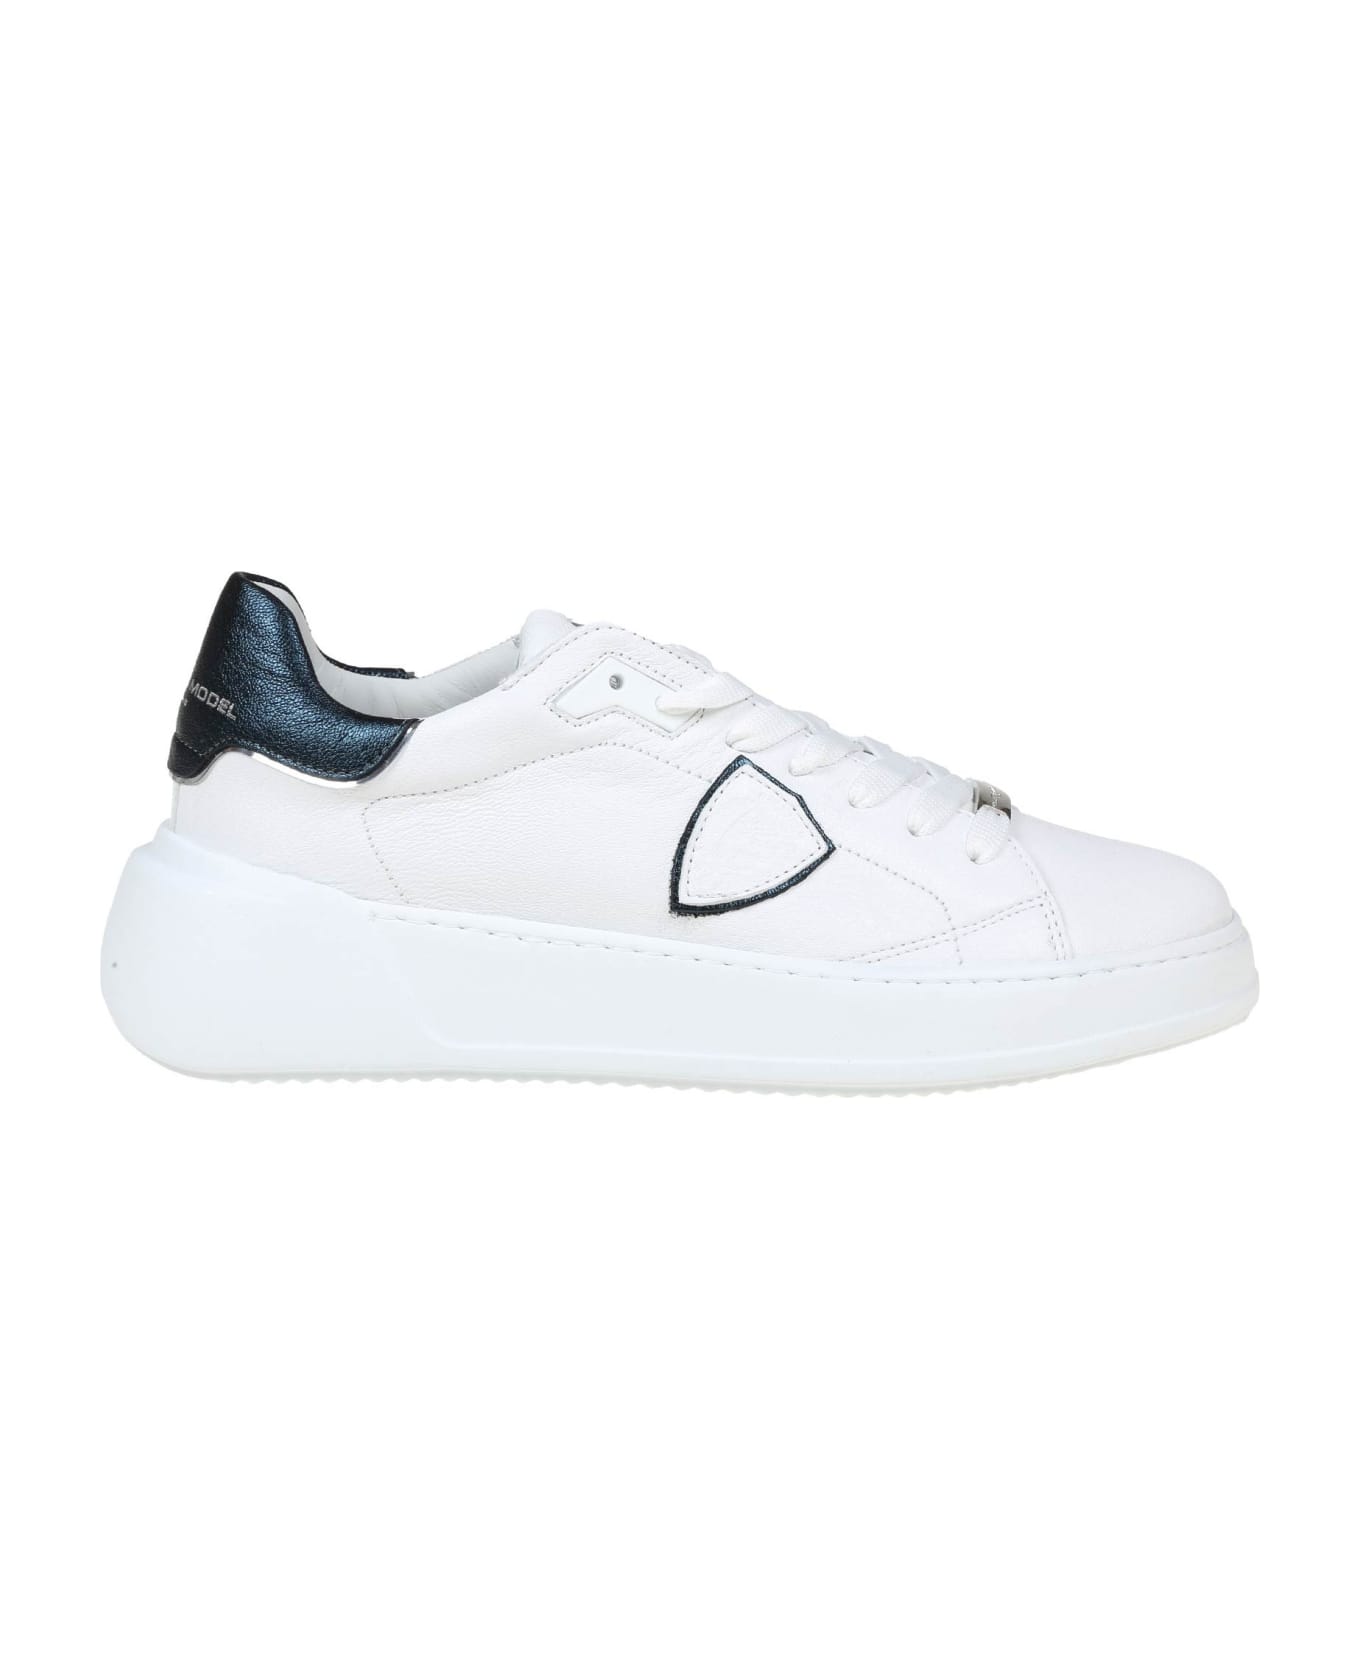 Philippe Model Tres Temple Low In Black And White Leather - WHITE/BLACK